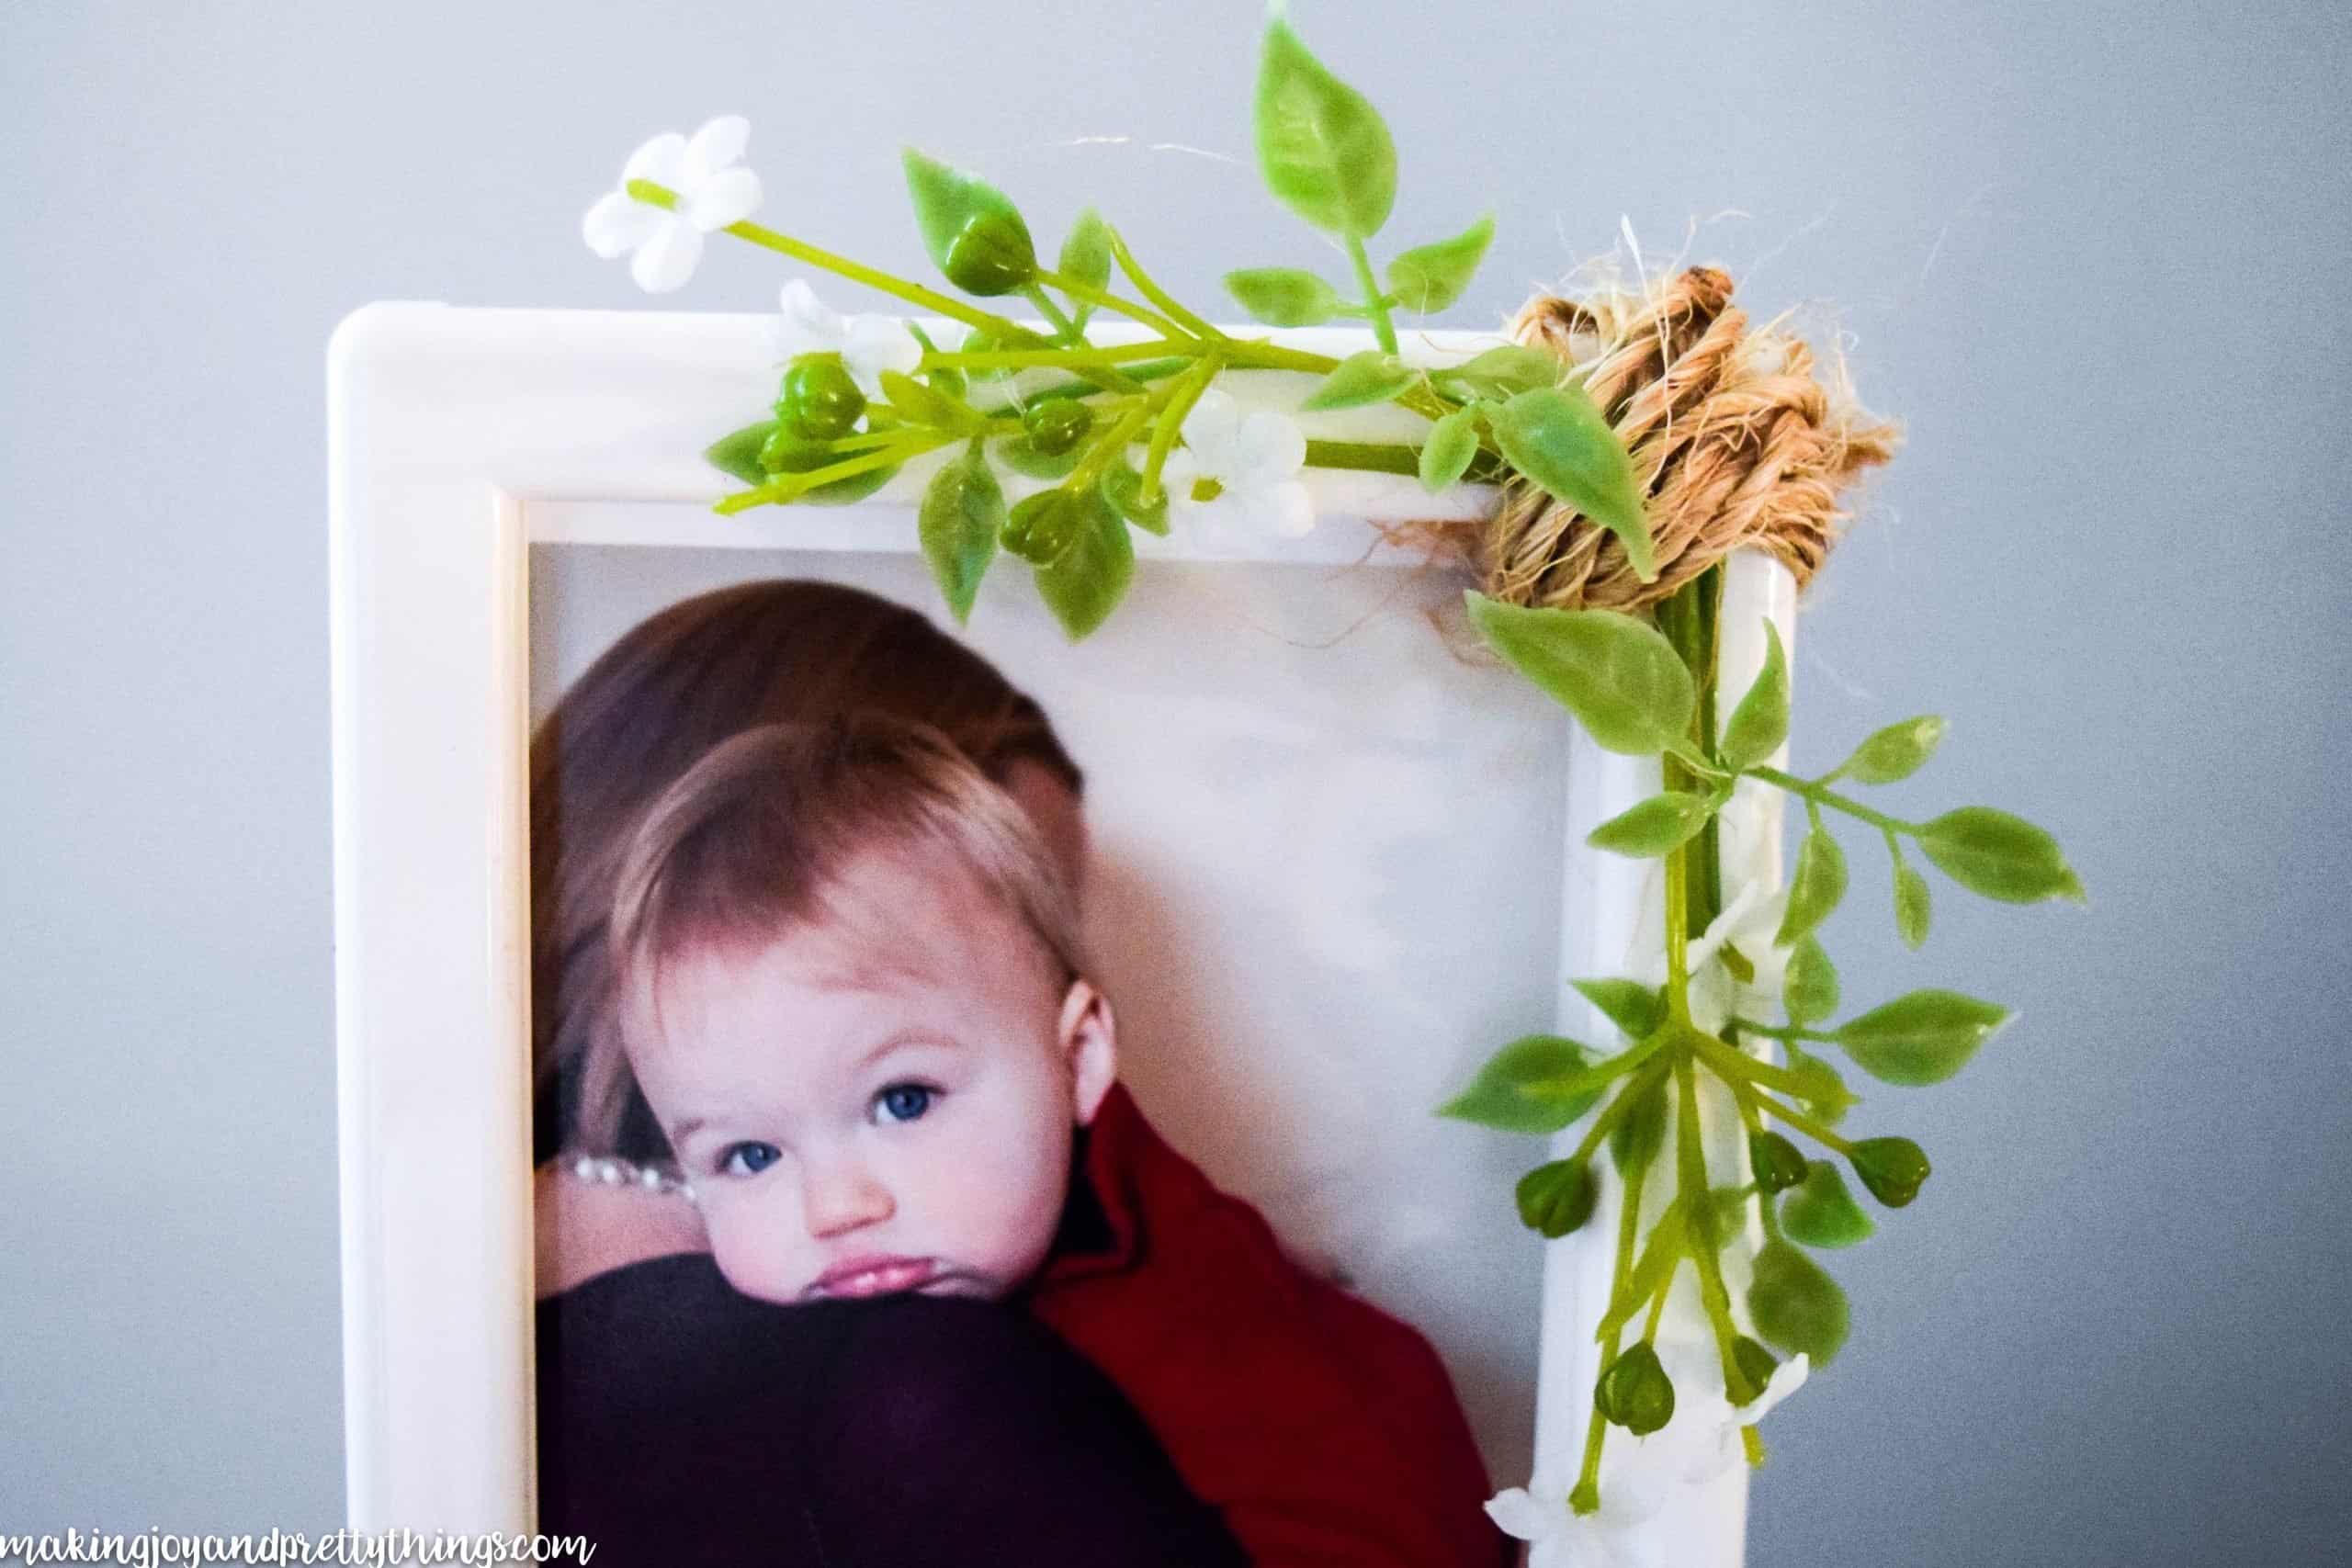 A simple white plastic picture frame is upgraded with a few sprigs of faux greenery and white flowers glued to the corner of the frame and wrapped with crafting twine. Inside the frame is a picture of a blue-eyed toddler resting their head on a mother's shoulder.